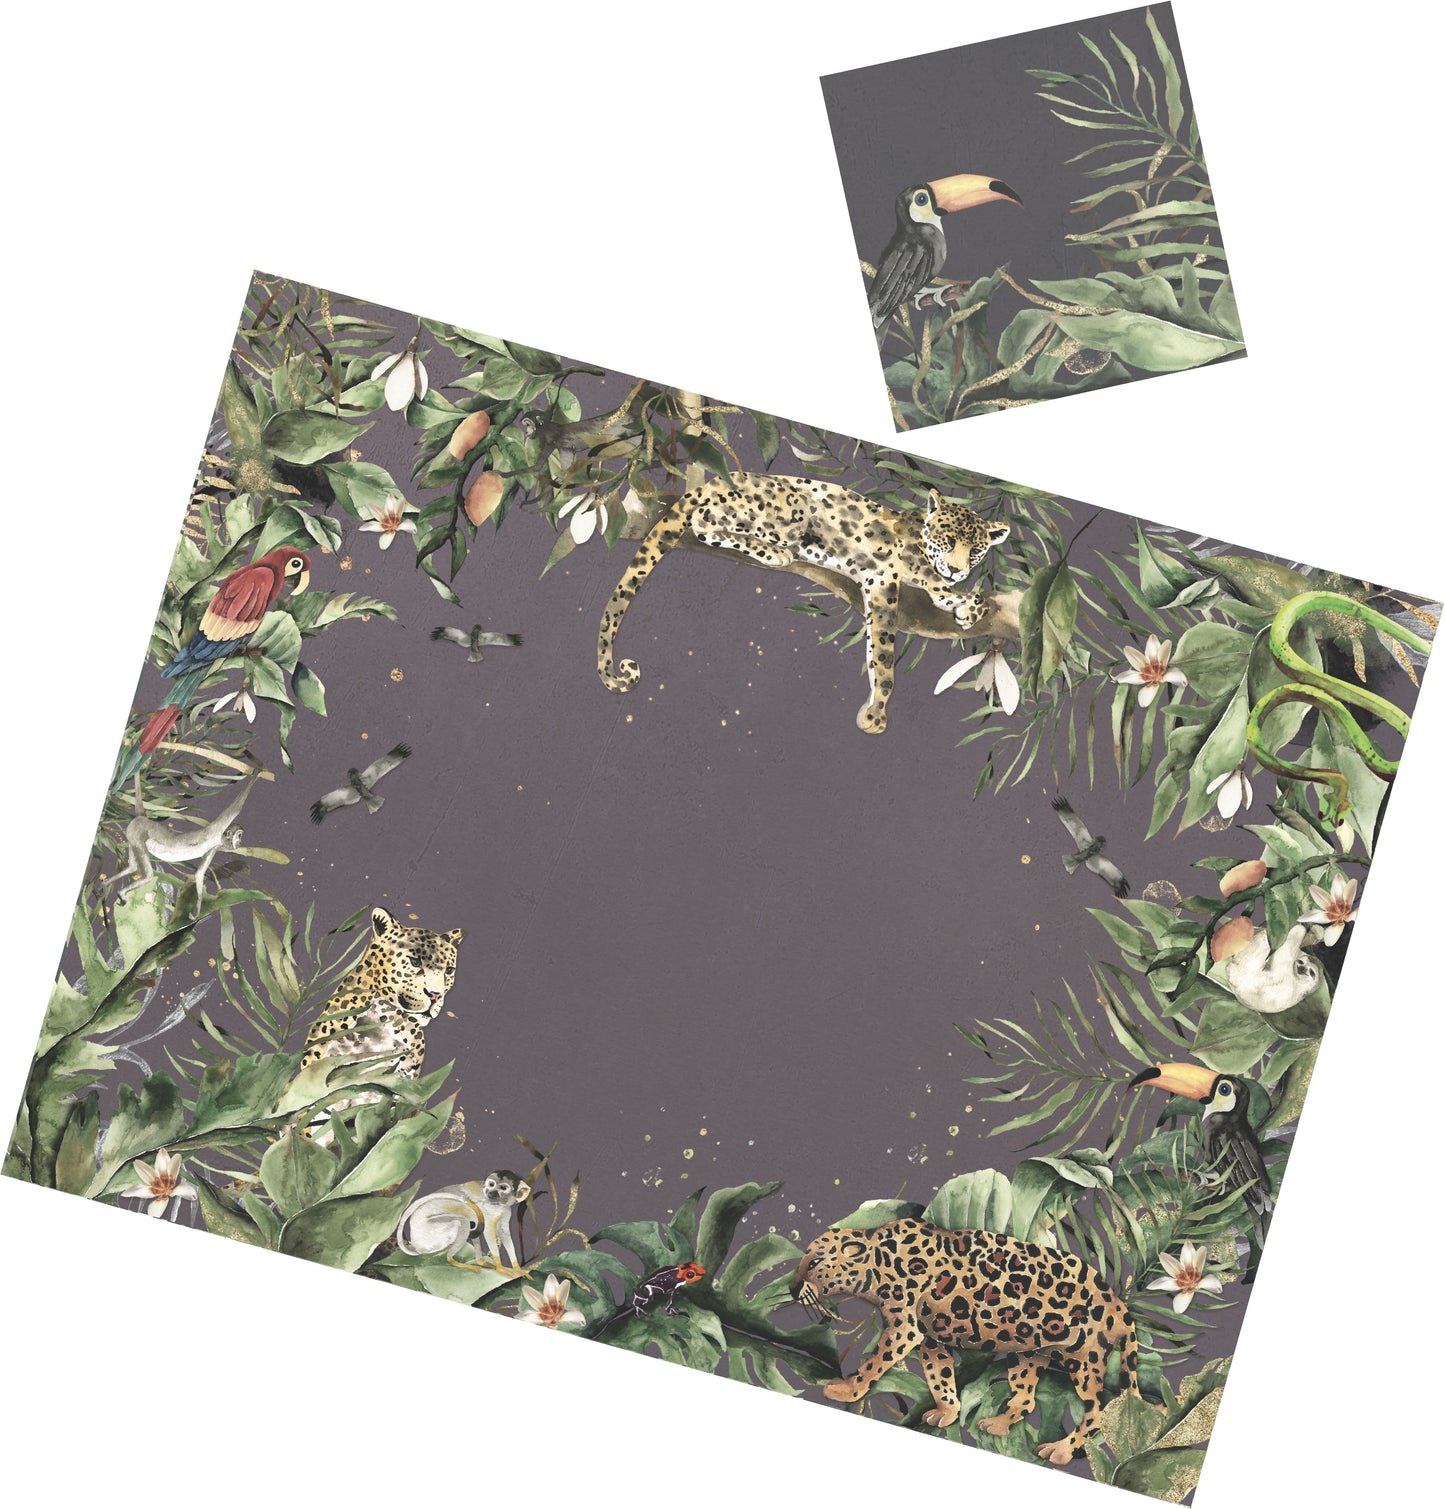 Beautiful and elegant, animal paper placemat.  Disposable rectangular paper place-mats with matching coasters.   Printed on heavy glossy card stock.   Set of 12  Place them together to create a runner   Two sizes available:  Square 13.5" x 12.5"  Rectangular 16.5" x 12.5"